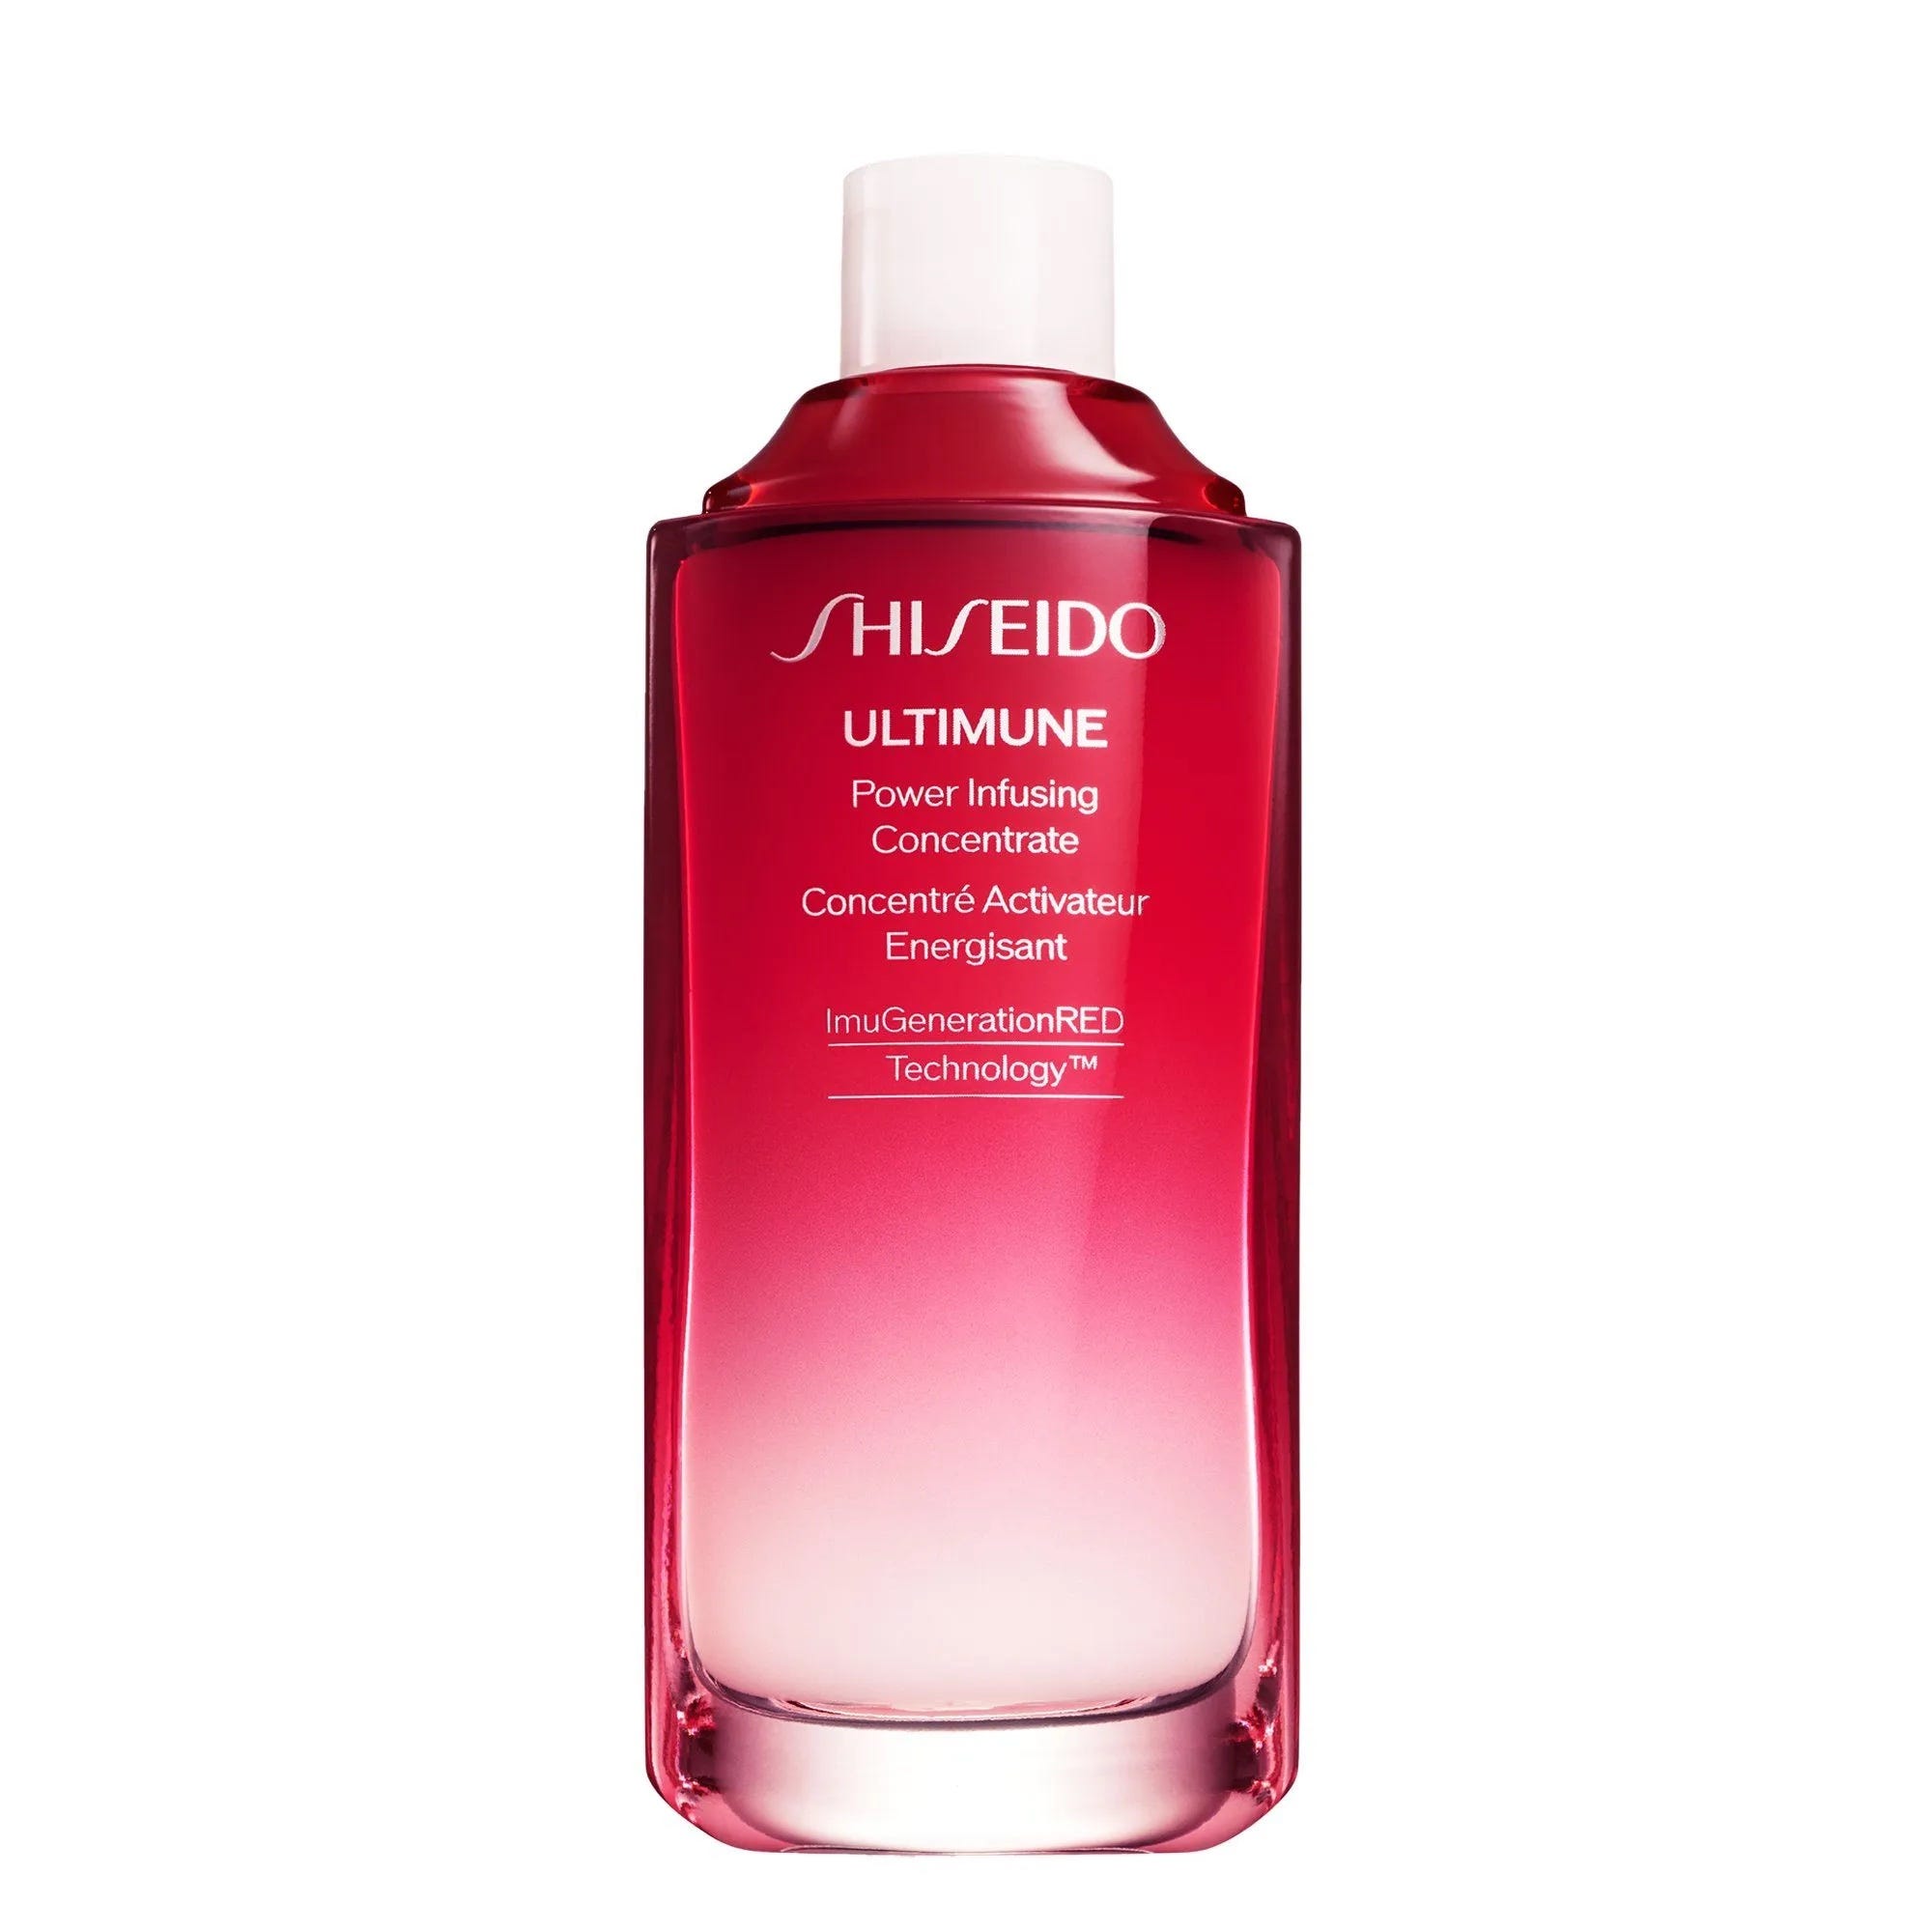 Image of Trattamento viso Shiseido Ultimune Power Infusing Concentrate Refill N